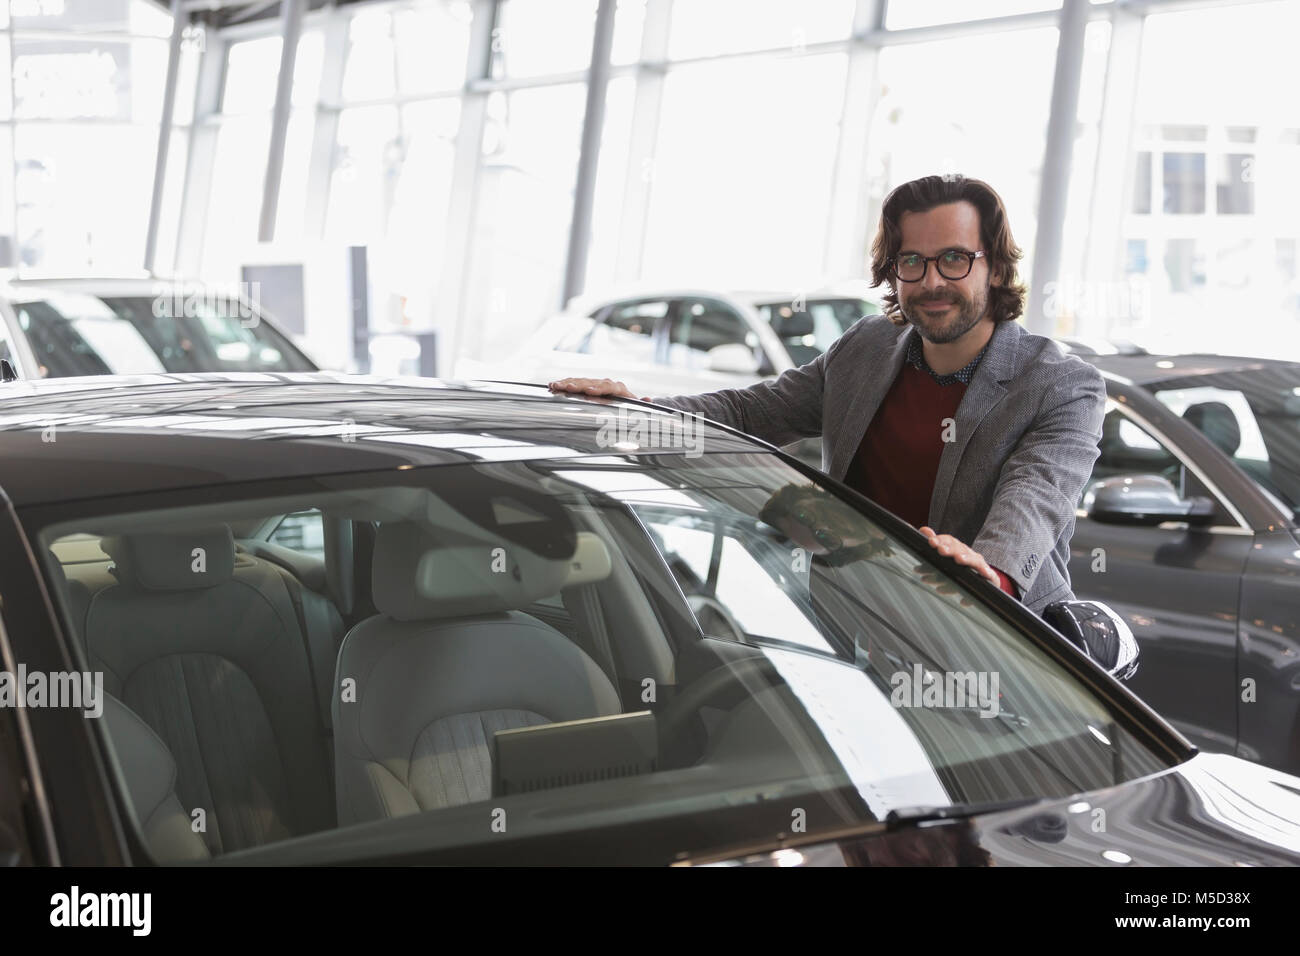 Portrait smiling male customer shopping for new car in car dealership showroom Banque D'Images